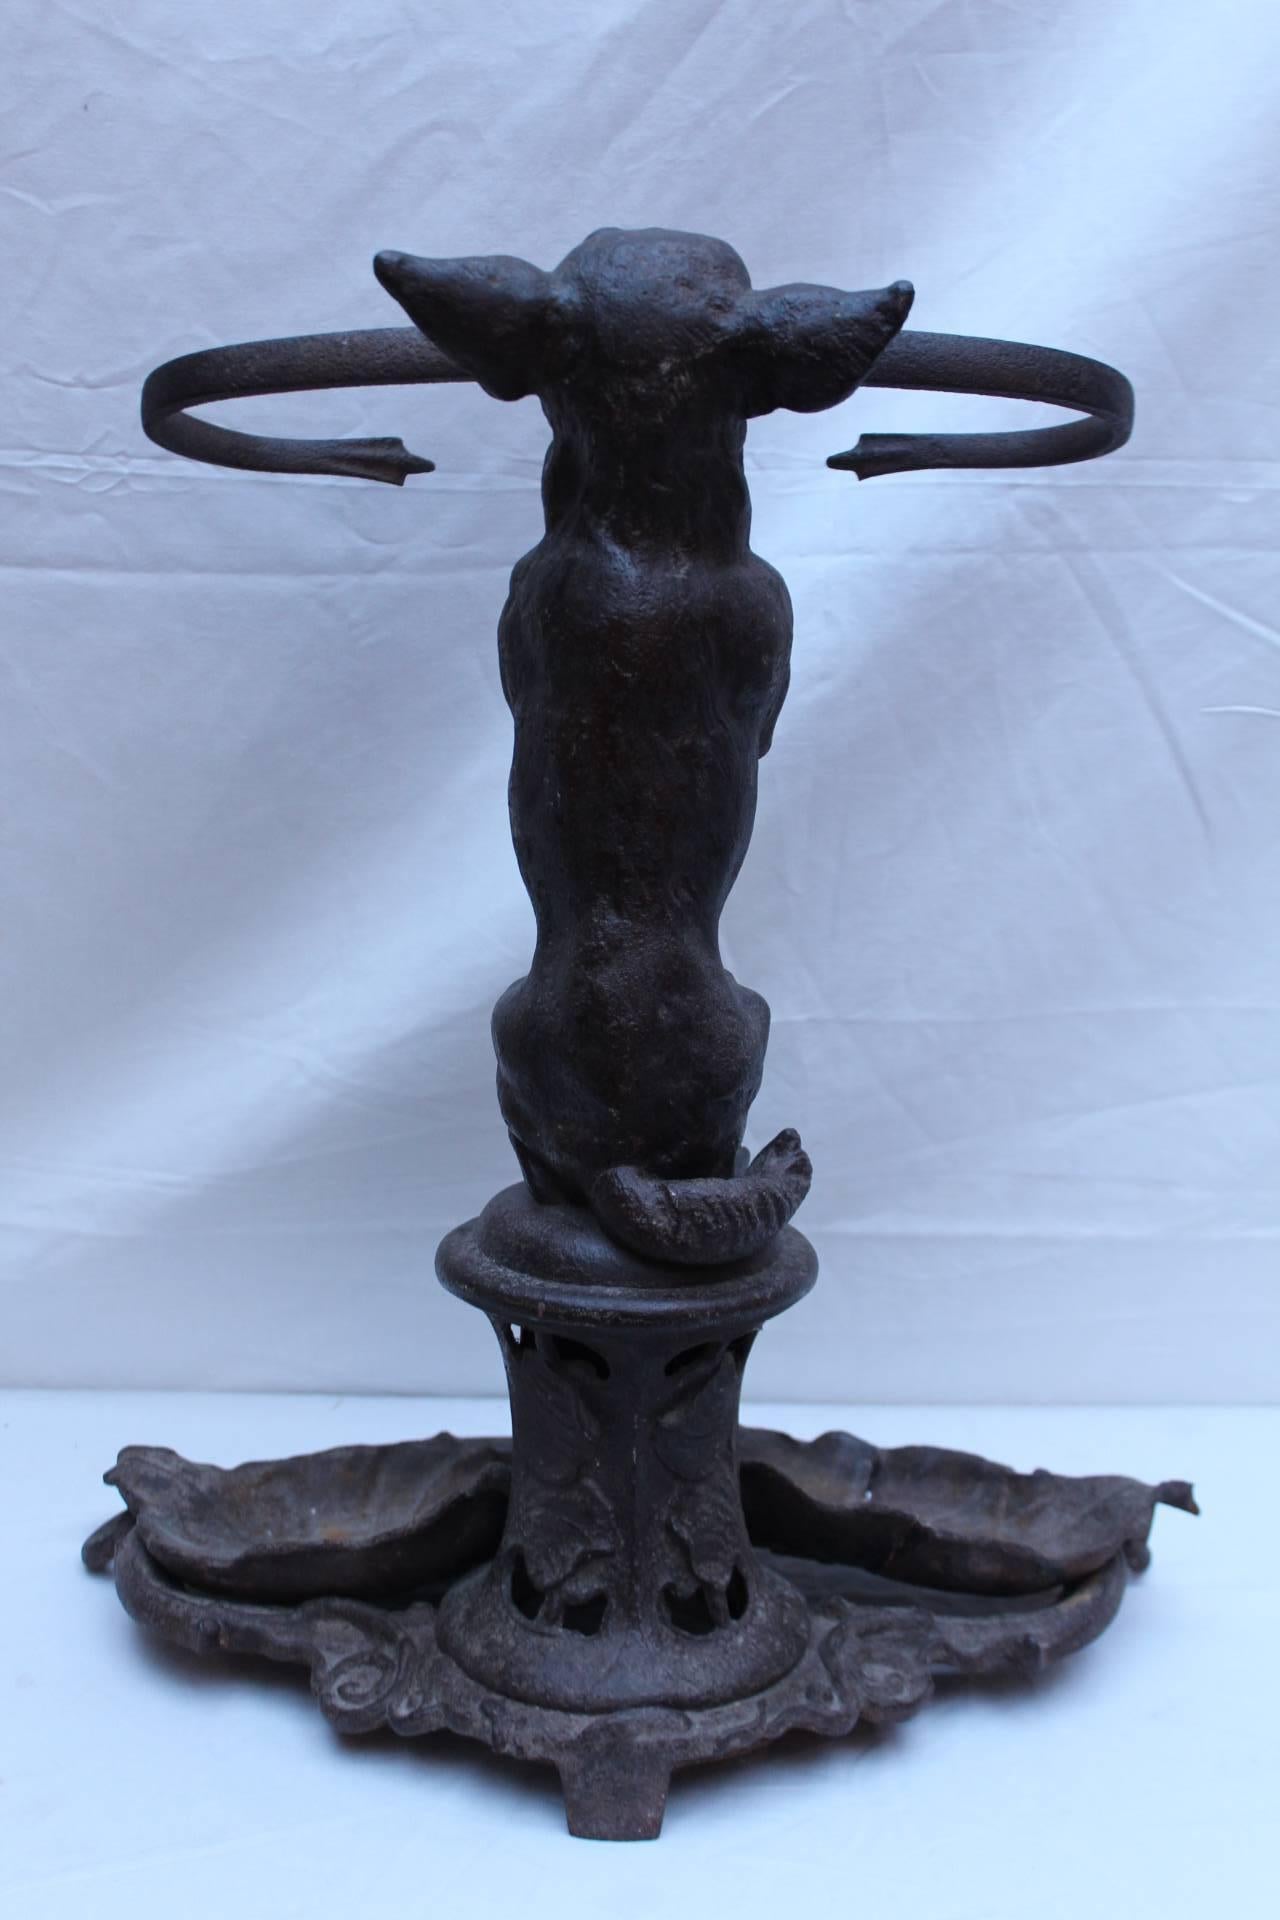 Umbrella Stand
French Art Foundry 
Circa 1870

Beautiful and original umbrella holder, made in cast iron, from a french art foundry. 